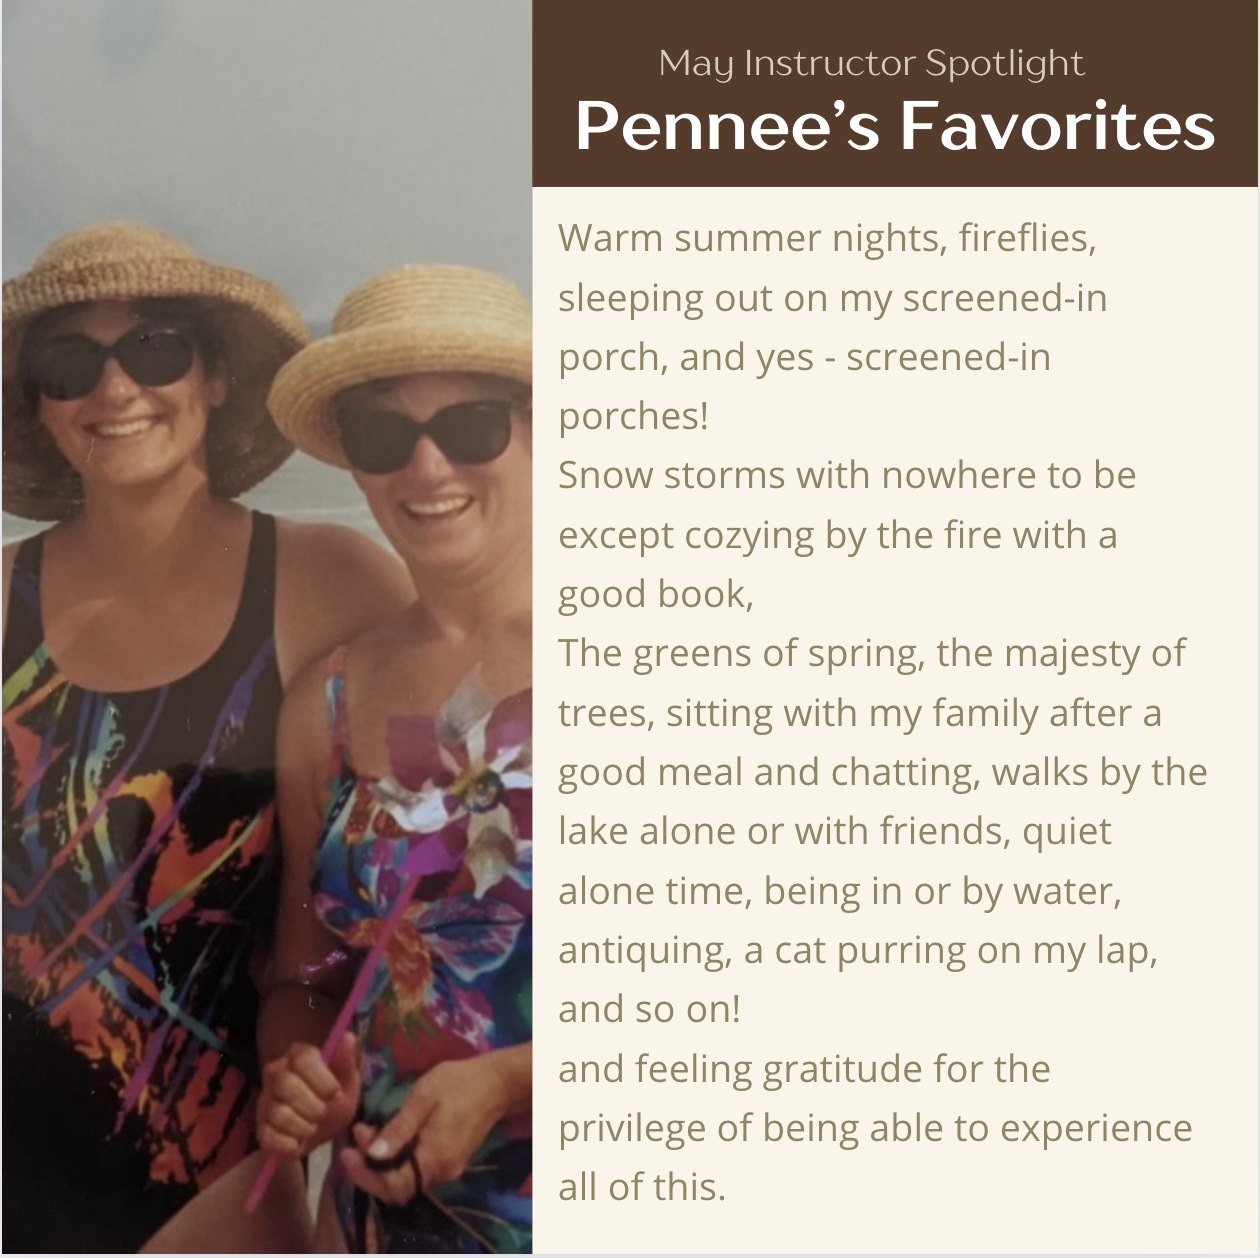 Pennee is our May Instructor Spotlight! 🌟 Get to know some of Pennee's favorites today! ✨ Do any of these resonate with you too!? 🌞🔥🙏

Reminder that Pennee's classes at the studio are :

Sundays - Restorative Yoga at 12 PM
Mondays - Gentle Mornin